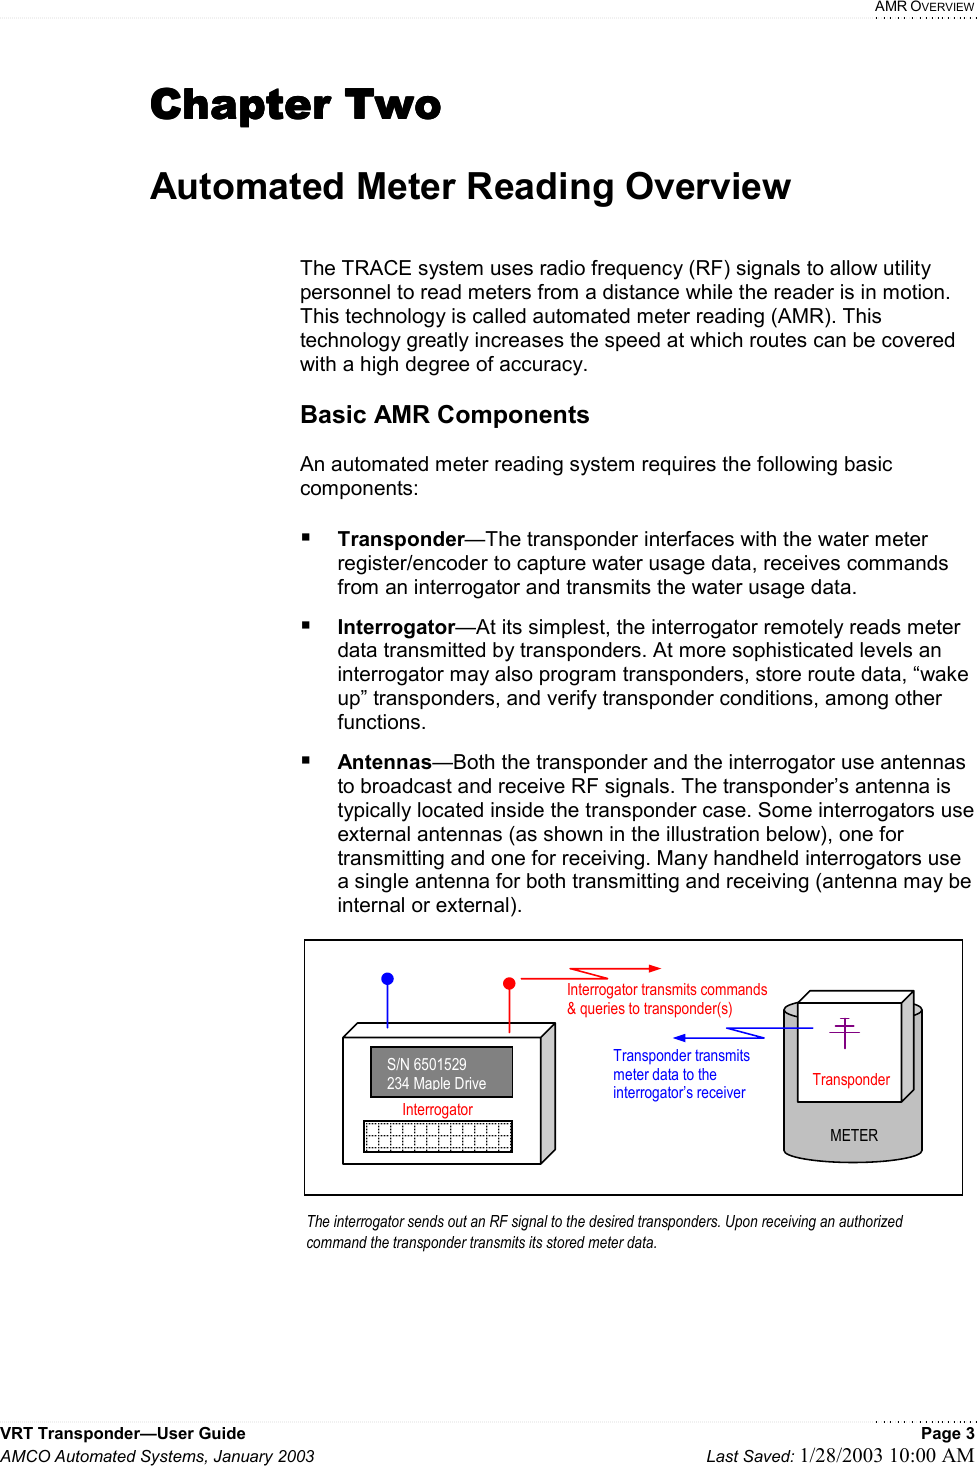   AMR OVERVIEW VRT Transponder—User Guide    Page 3 AMCO Automated Systems, January 2003    Last Saved: 1/28/2003 10:00 AM  Chapter TwoChapter TwoChapter TwoChapter Two     Automated Meter Reading Overview   The TRACE system uses radio frequency (RF) signals to allow utility personnel to read meters from a distance while the reader is in motion. This technology is called automated meter reading (AMR). This technology greatly increases the speed at which routes can be covered with a high degree of accuracy.  Basic AMR Components  An automated meter reading system requires the following basic components:   Transponder—The transponder interfaces with the water meter register/encoder to capture water usage data, receives commands from an interrogator and transmits the water usage data.  Interrogator—At its simplest, the interrogator remotely reads meter data transmitted by transponders. At more sophisticated levels an interrogator may also program transponders, store route data, “wake up” transponders, and verify transponder conditions, among other functions.  Antennas—Both the transponder and the interrogator use antennas to broadcast and receive RF signals. The transponder’s antenna is typically located inside the transponder case. Some interrogators use external antennas (as shown in the illustration below), one for transmitting and one for receiving. Many handheld interrogators use a single antenna for both transmitting and receiving (antenna may be internal or external).                TransponderMETERThe interrogator sends out an RF signal to the desired transponders. Upon receiving an authorized command the transponder transmits its stored meter data.  S/N 6501529234 Maple DriveInterrogatorInterrogator transmits commands &amp; queries to transponder(s)  Transponder transmits  meter data to the interrogator’s receiver   